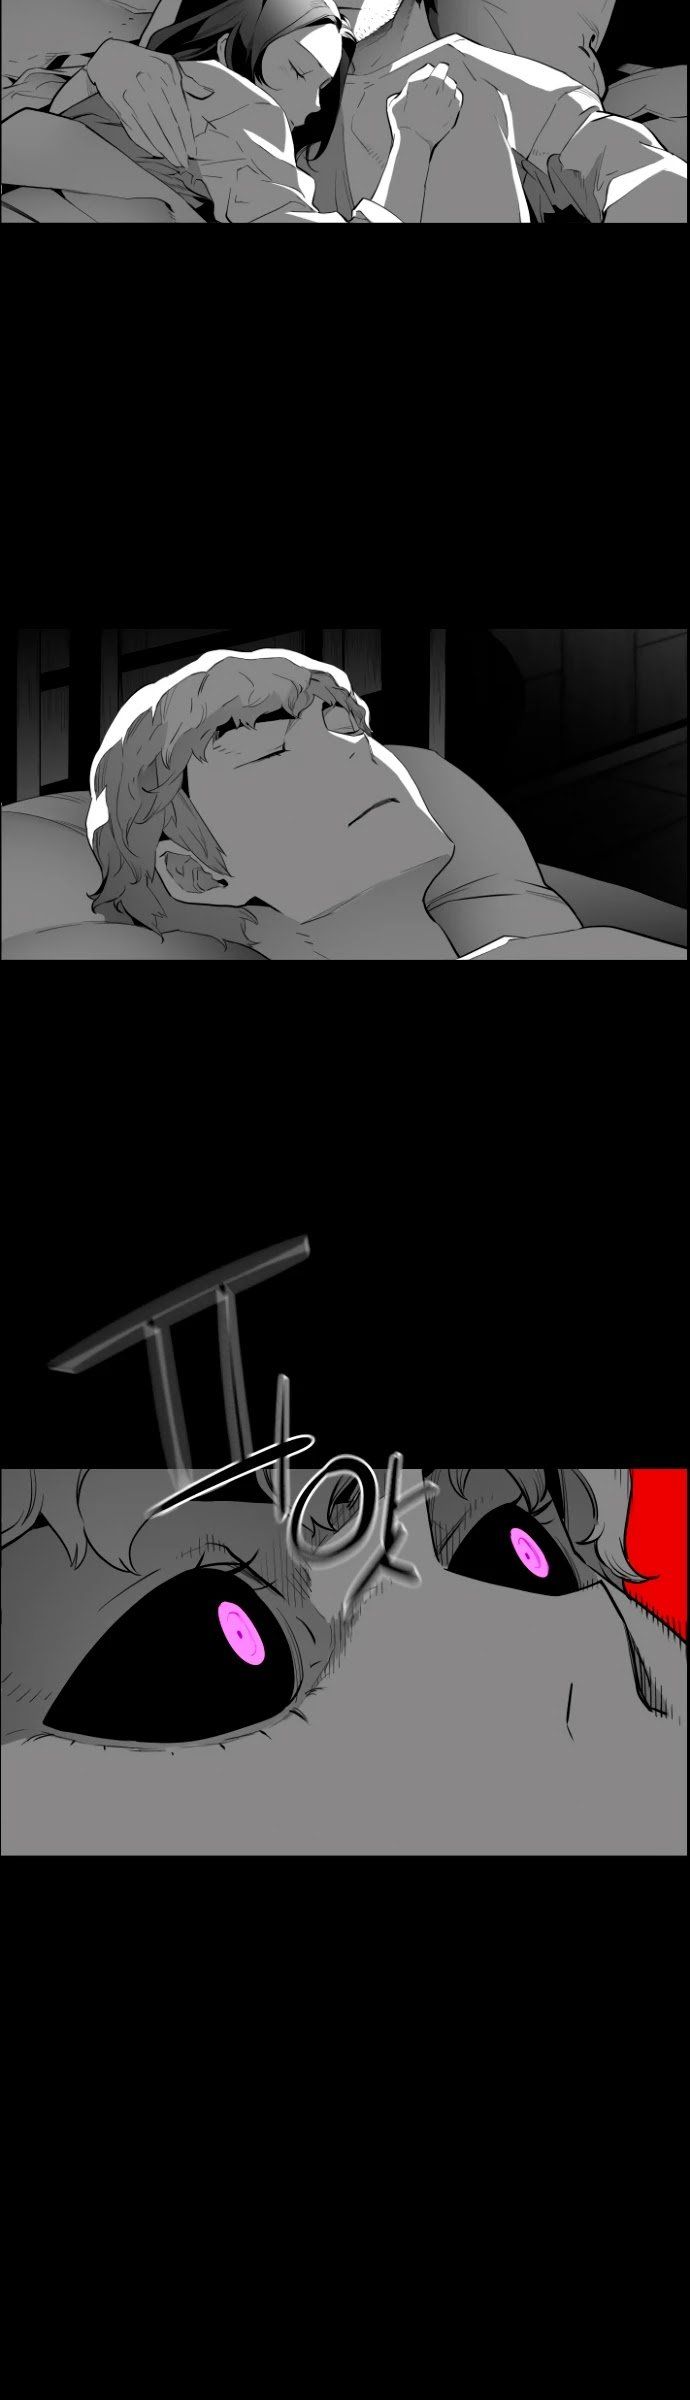 Terror Man Chapter 209 - END page 26